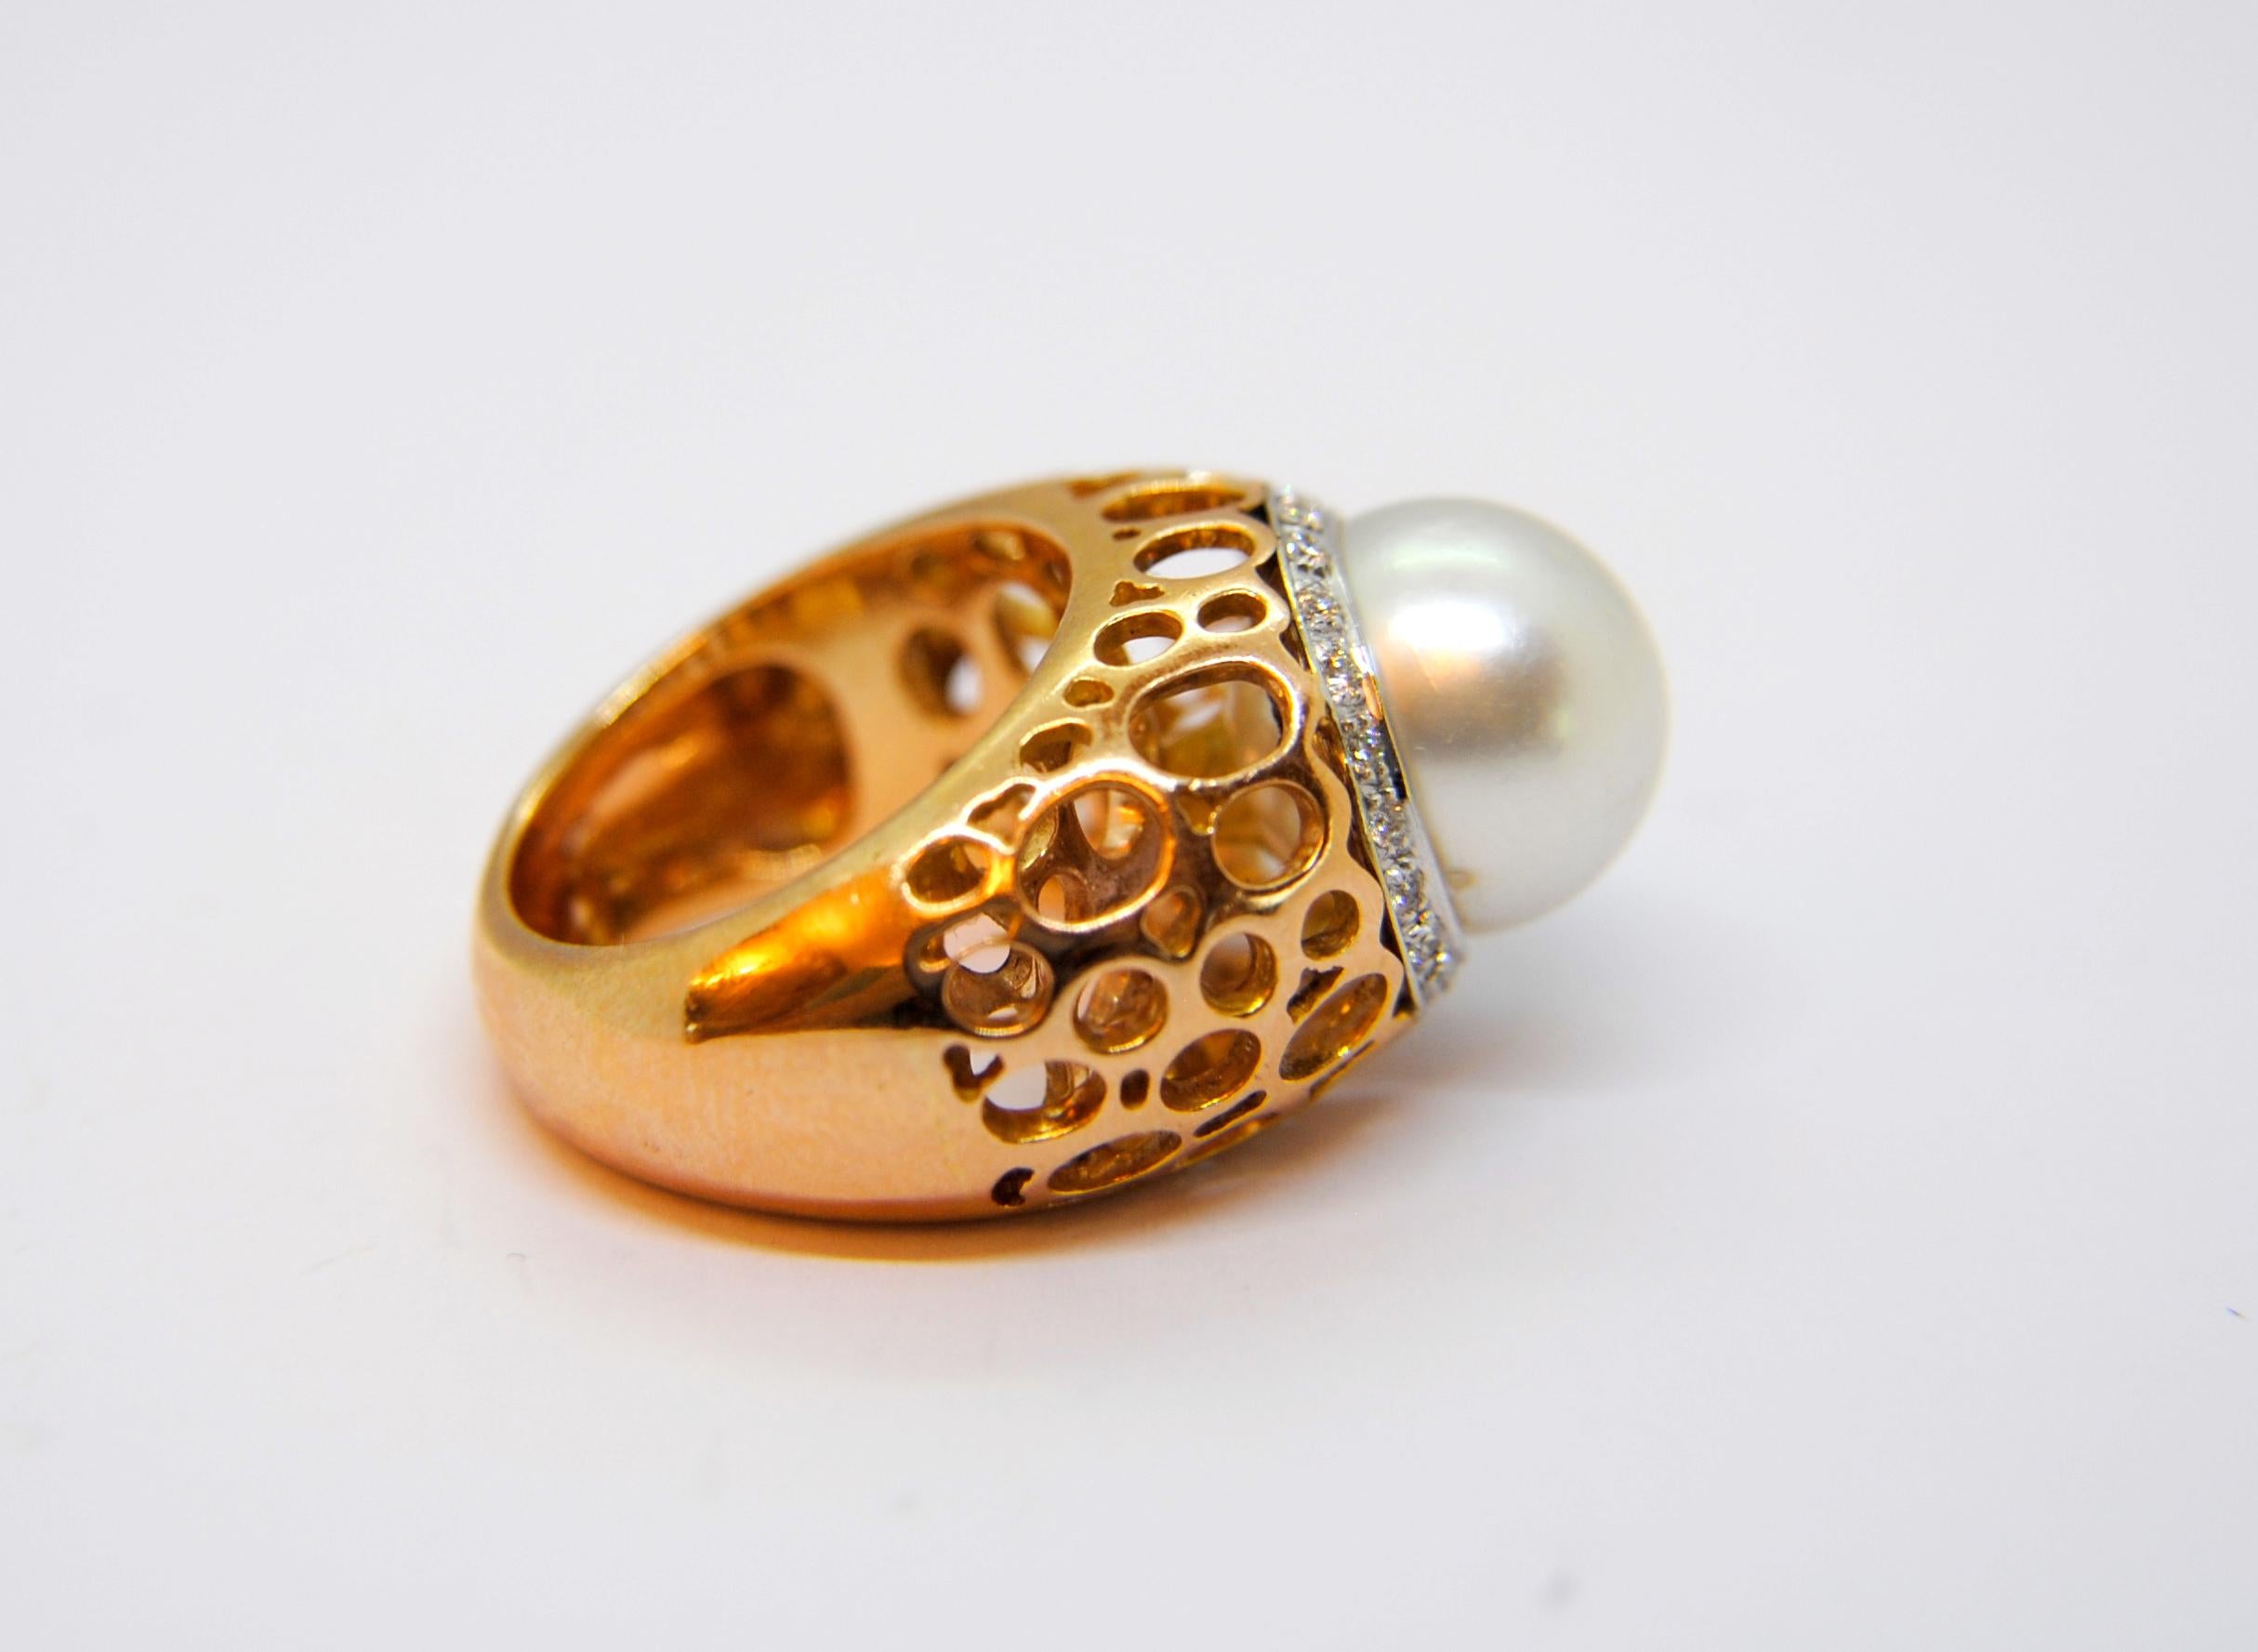 Australian Pearl with Diamonds and Arabesque Design in 18 Karat Pink Gold Ring For Sale 2